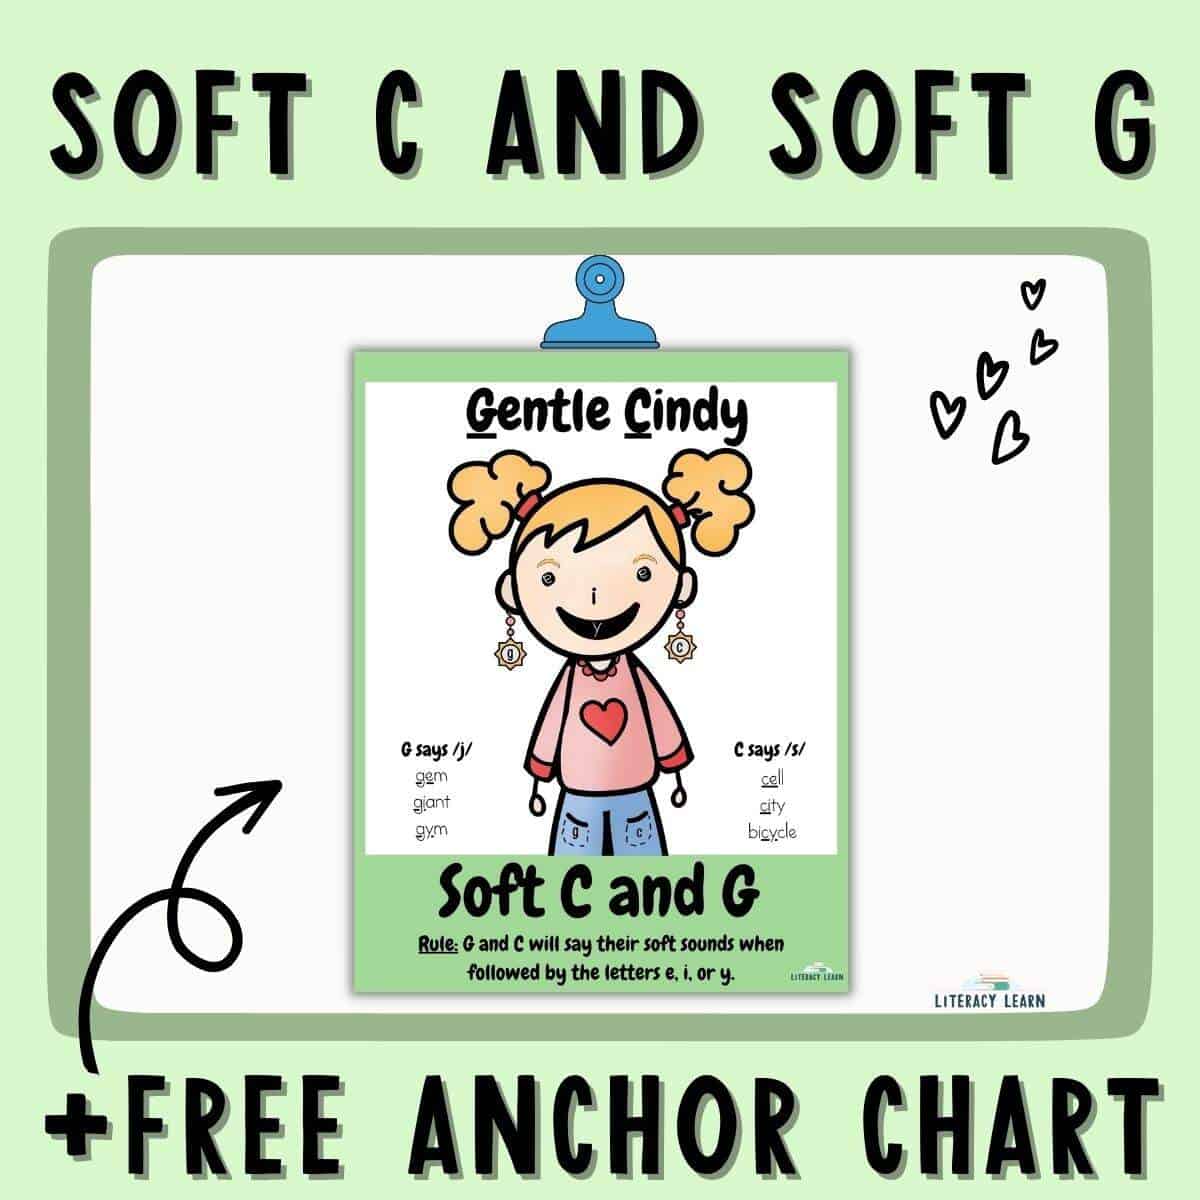 teaching-soft-c-soft-g-sounds-free-anchor-chart-literacy-learn